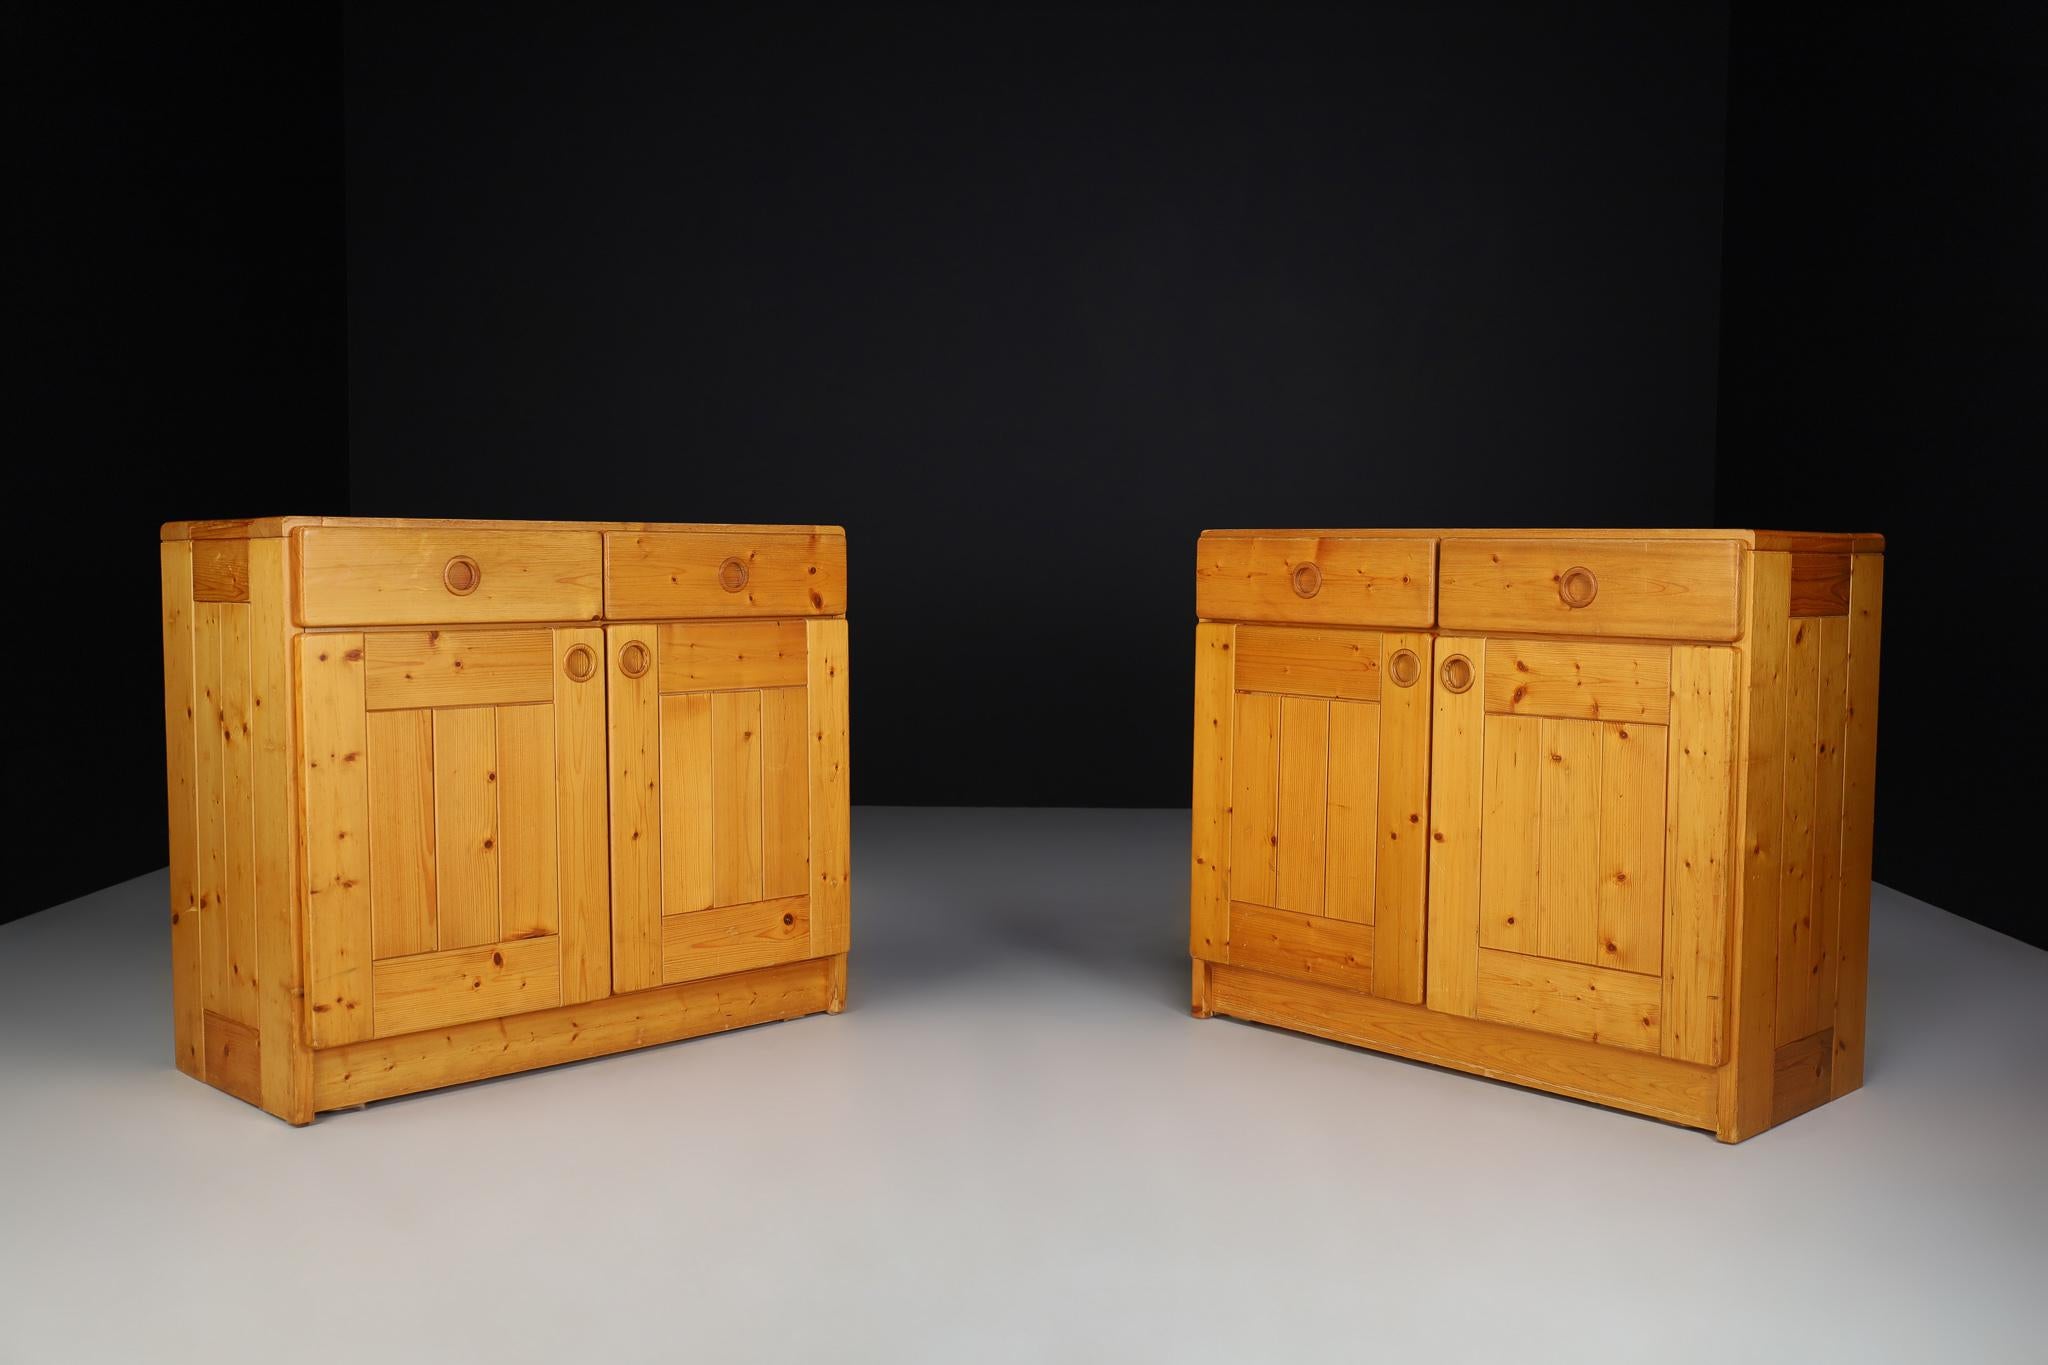 Mid-Century Modern cabinet/cupboard by Charlotte Perriand for Les Arcs. With two pull-out drawers. The doors open to a shelf with two spaces for storage. It is made of pine circa 1970s—good original condition. Very nice original patina.

4